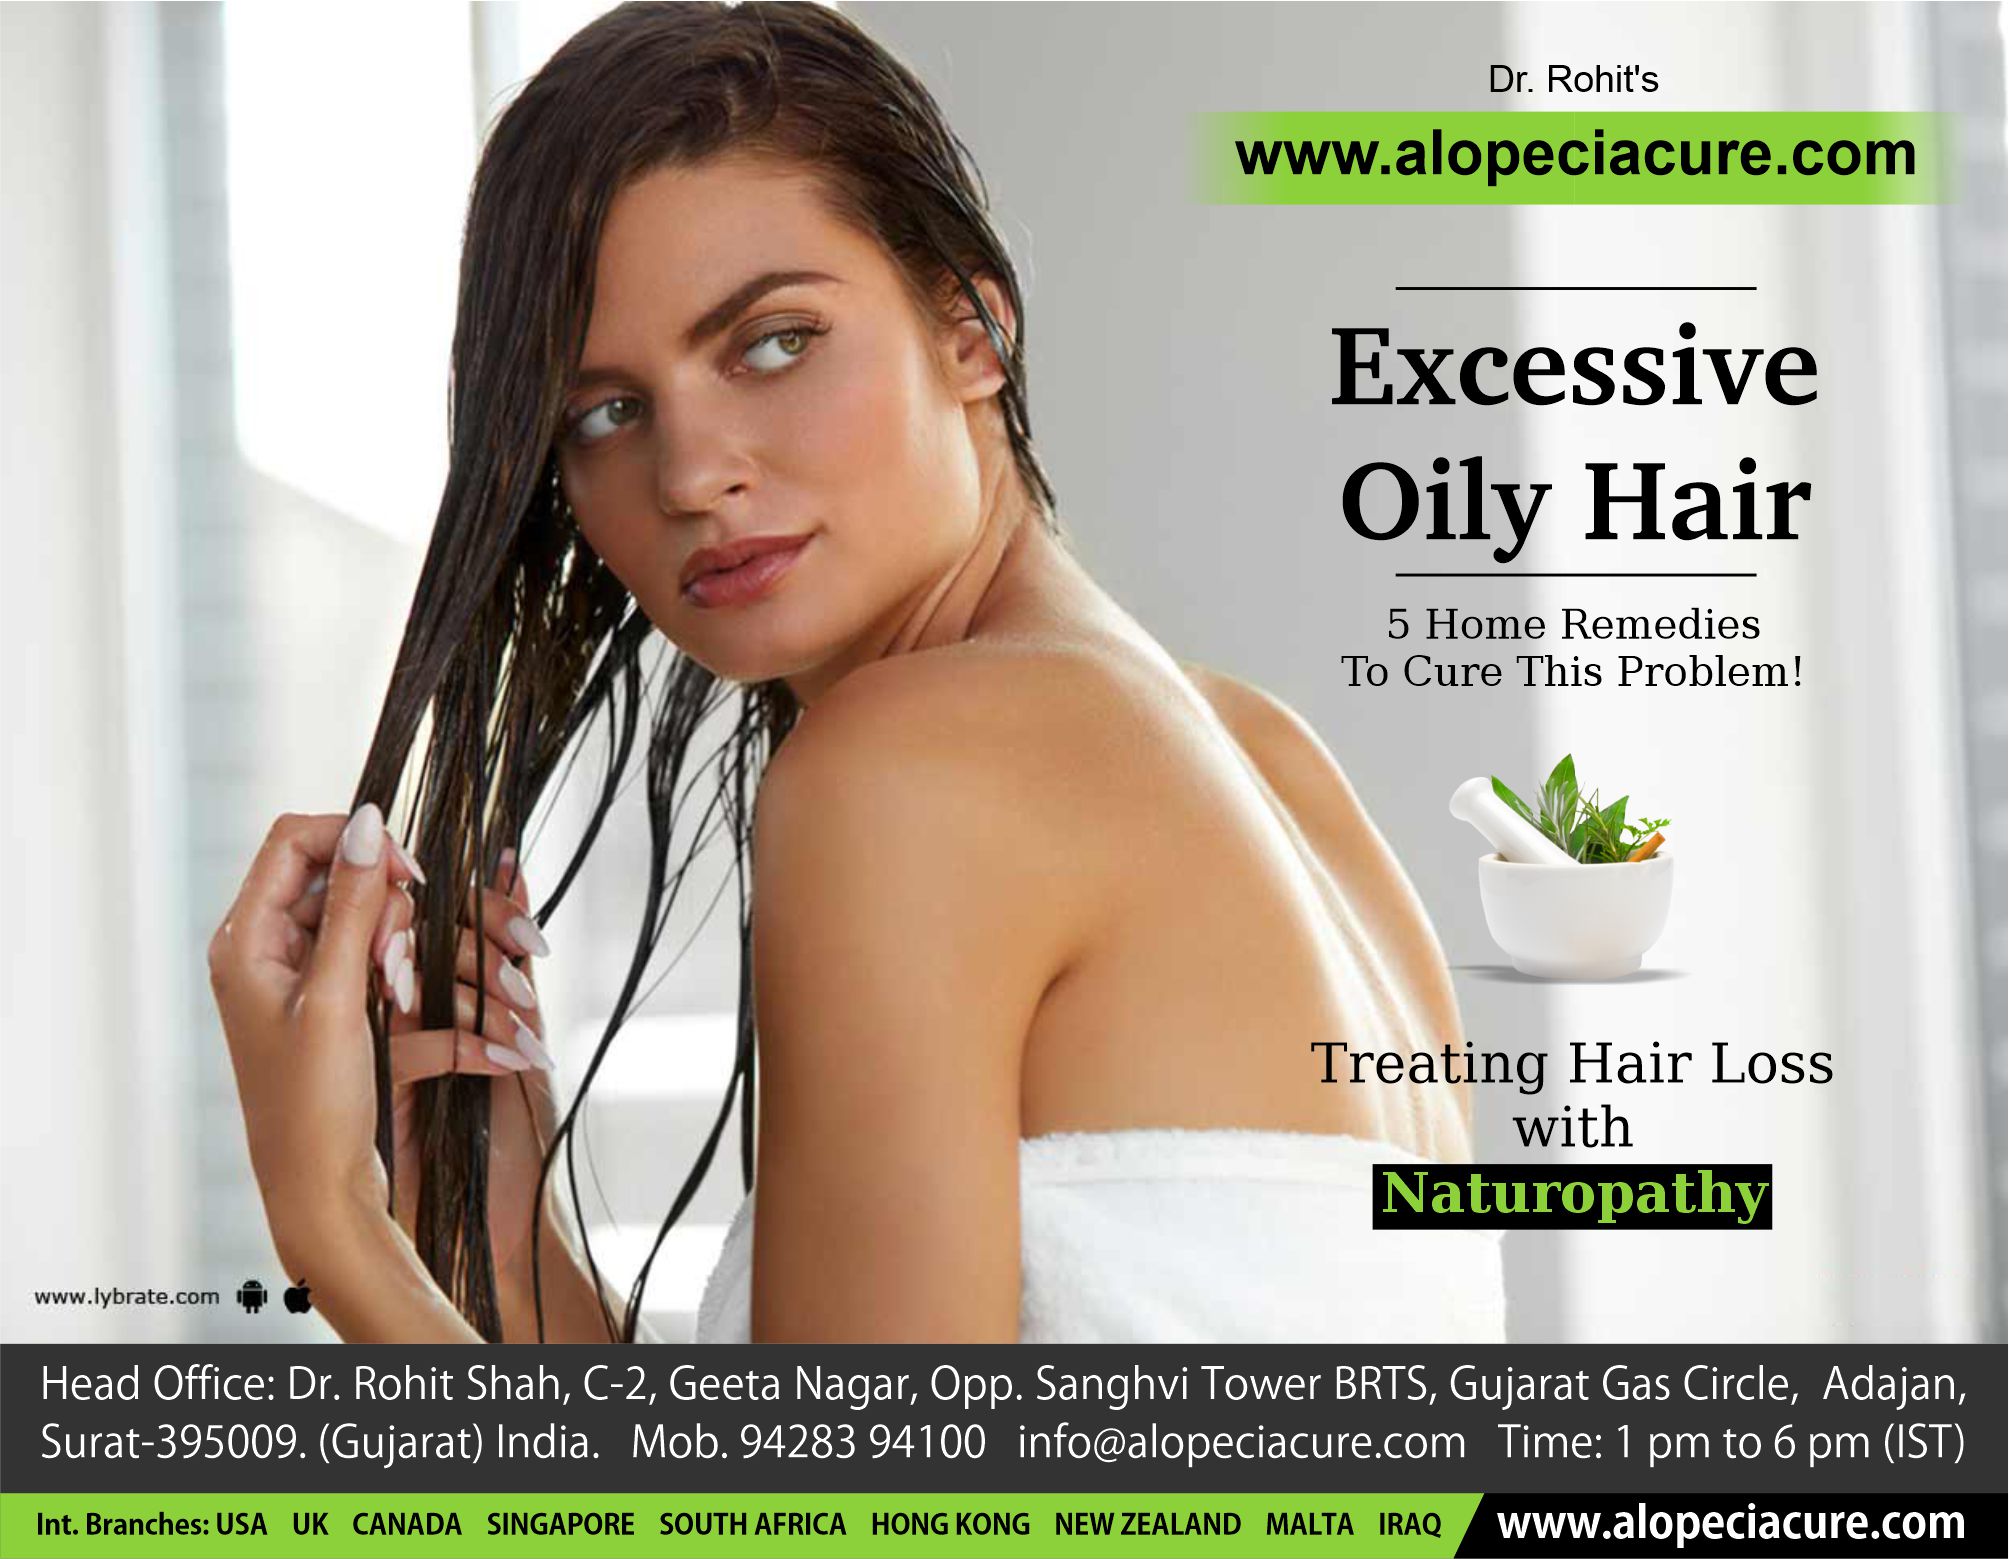 Excessive Oily Hair - 5 Home Remedies To Cure This Problem!